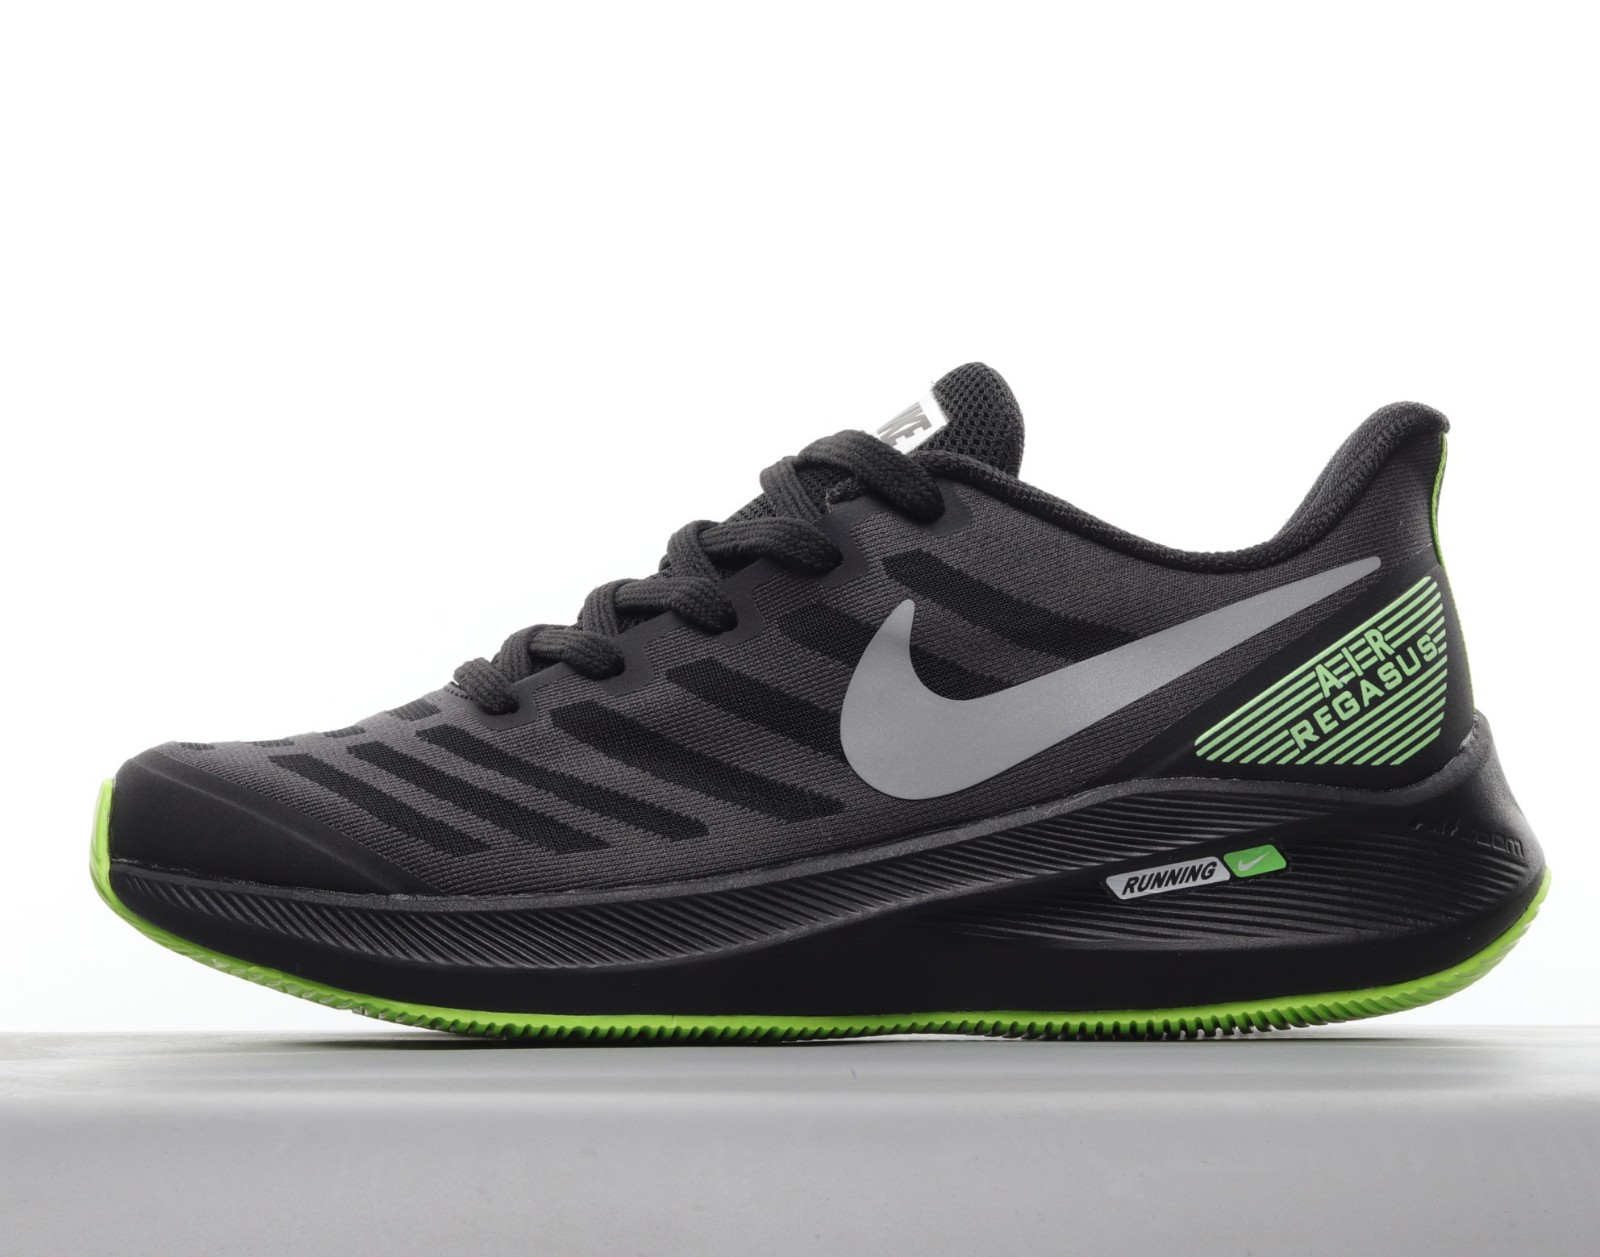 Nike LunarGlide 8 Running Shoes Black Green 843725 New Womens Muse Metal Athletic Sneaker Parchment Rose StclaircomoShops - 005